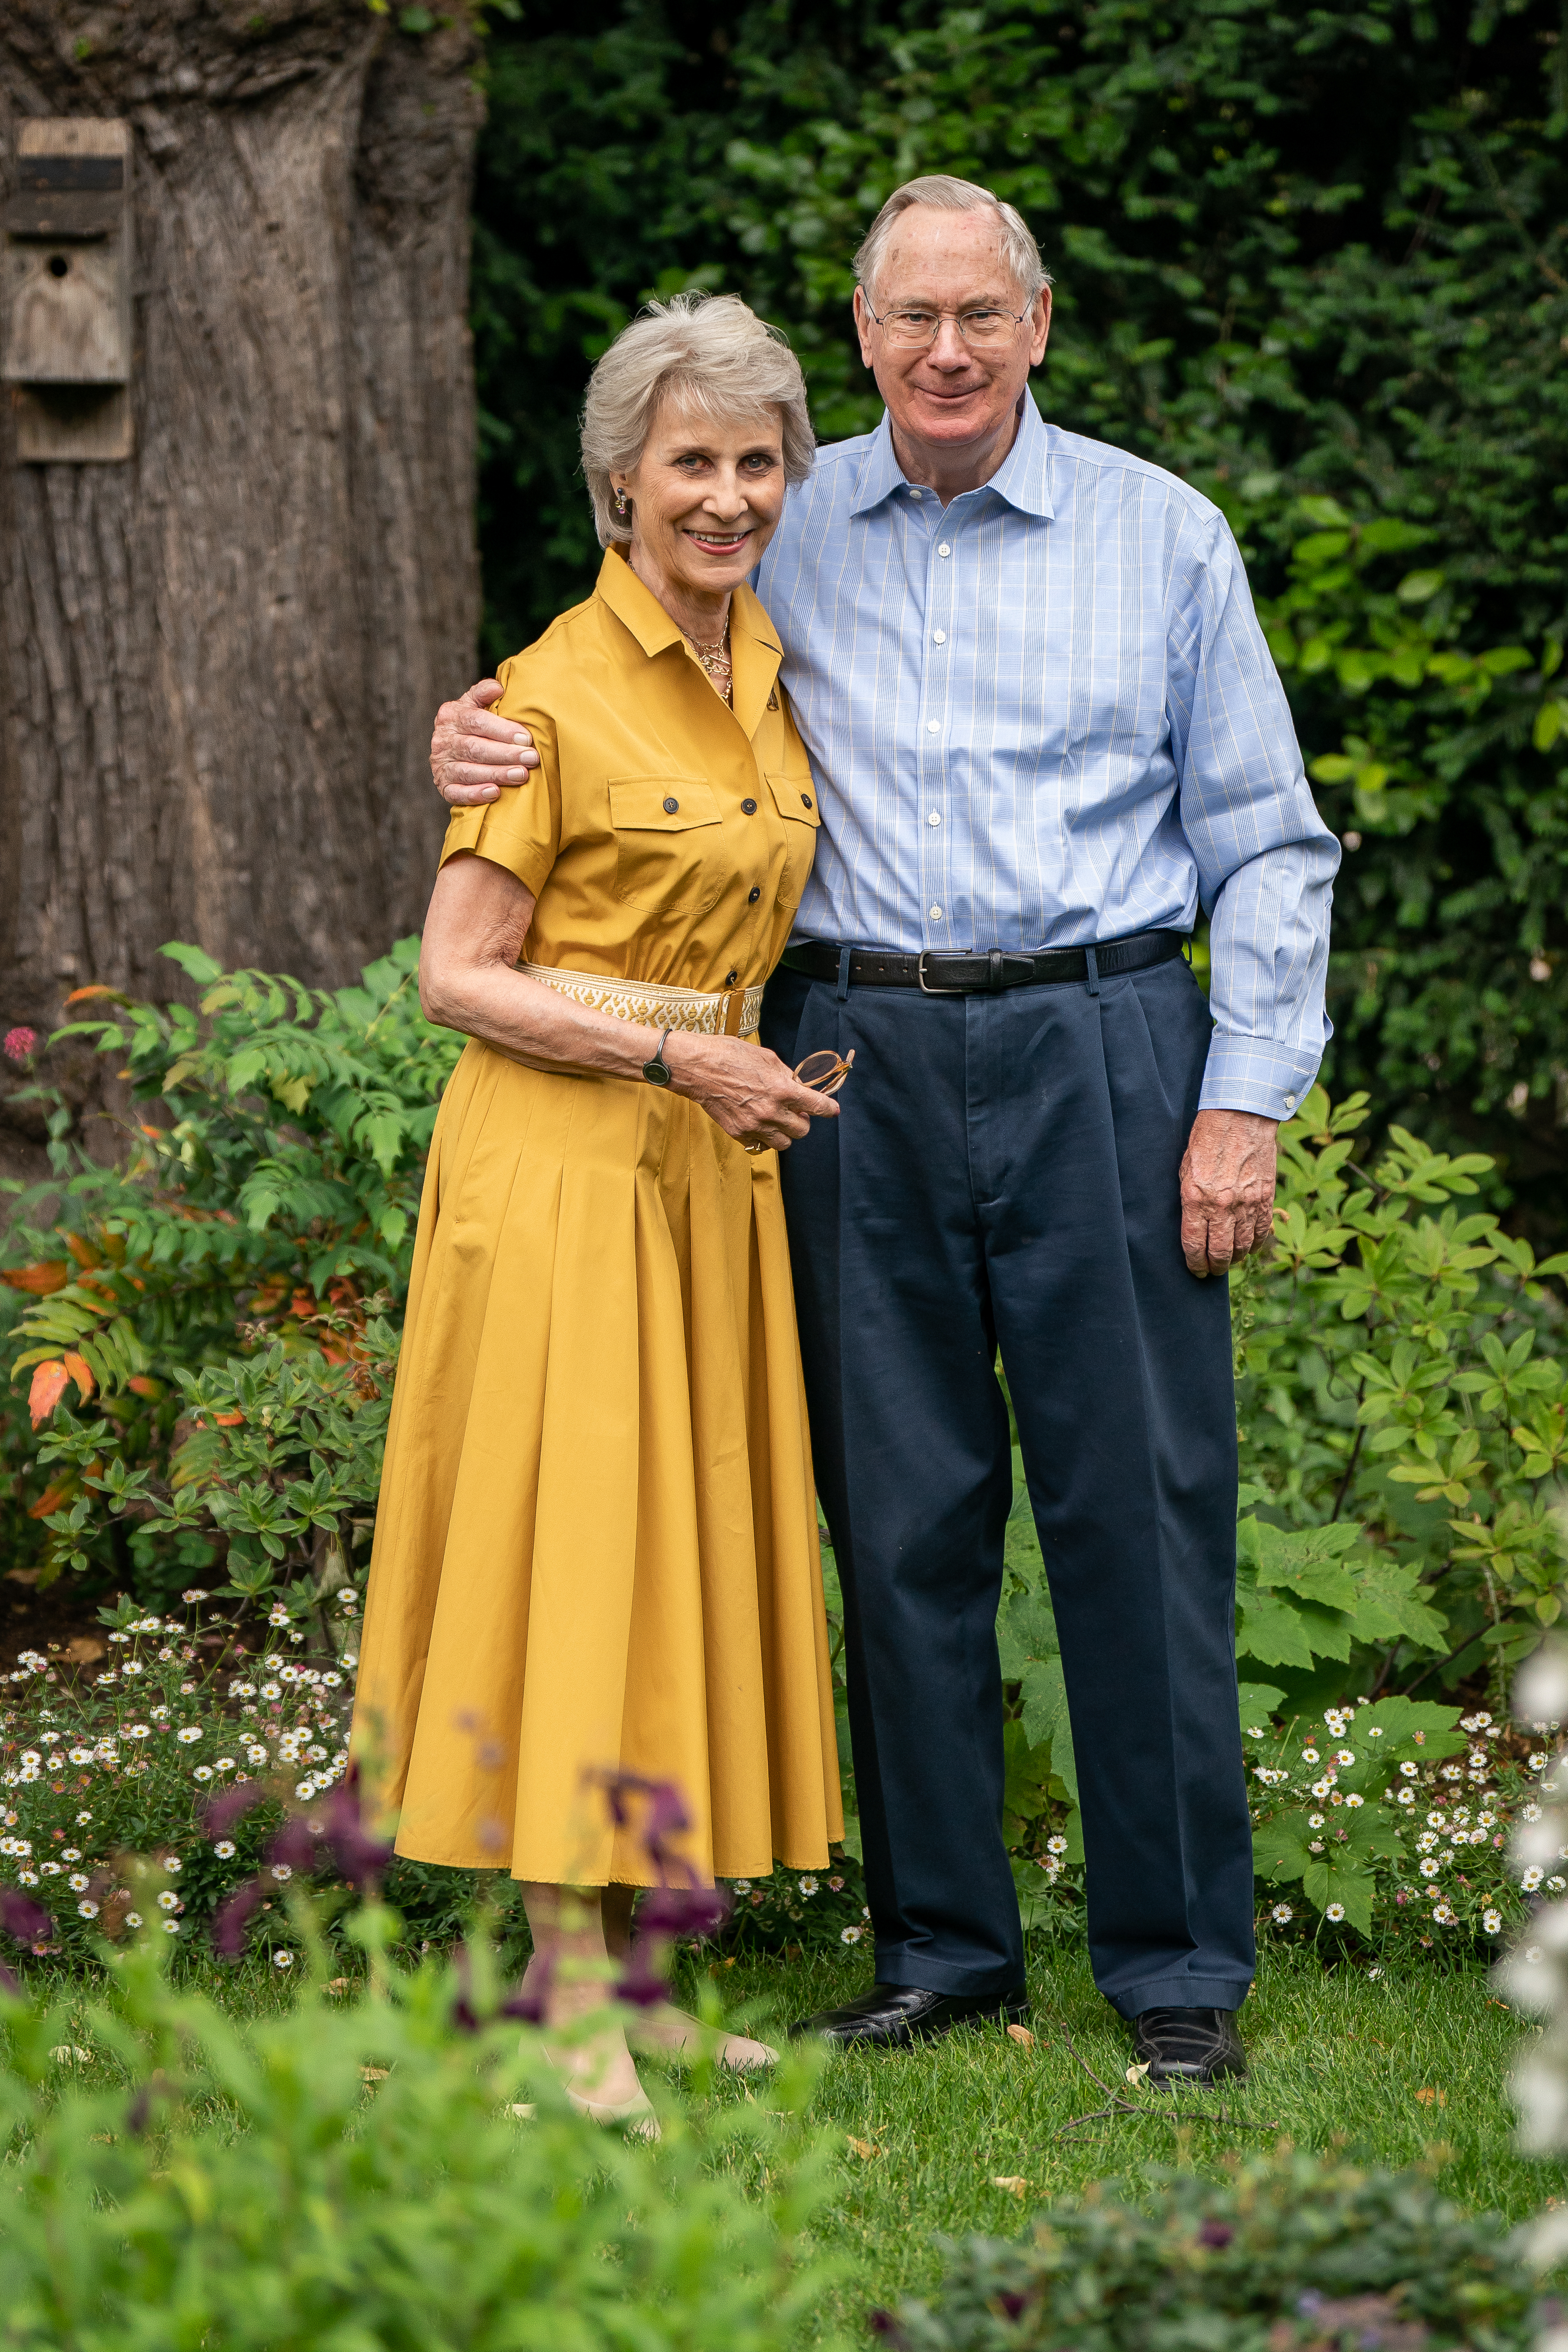 The Duke and Duchess of Gloucester in their Golden Anniversary portrait